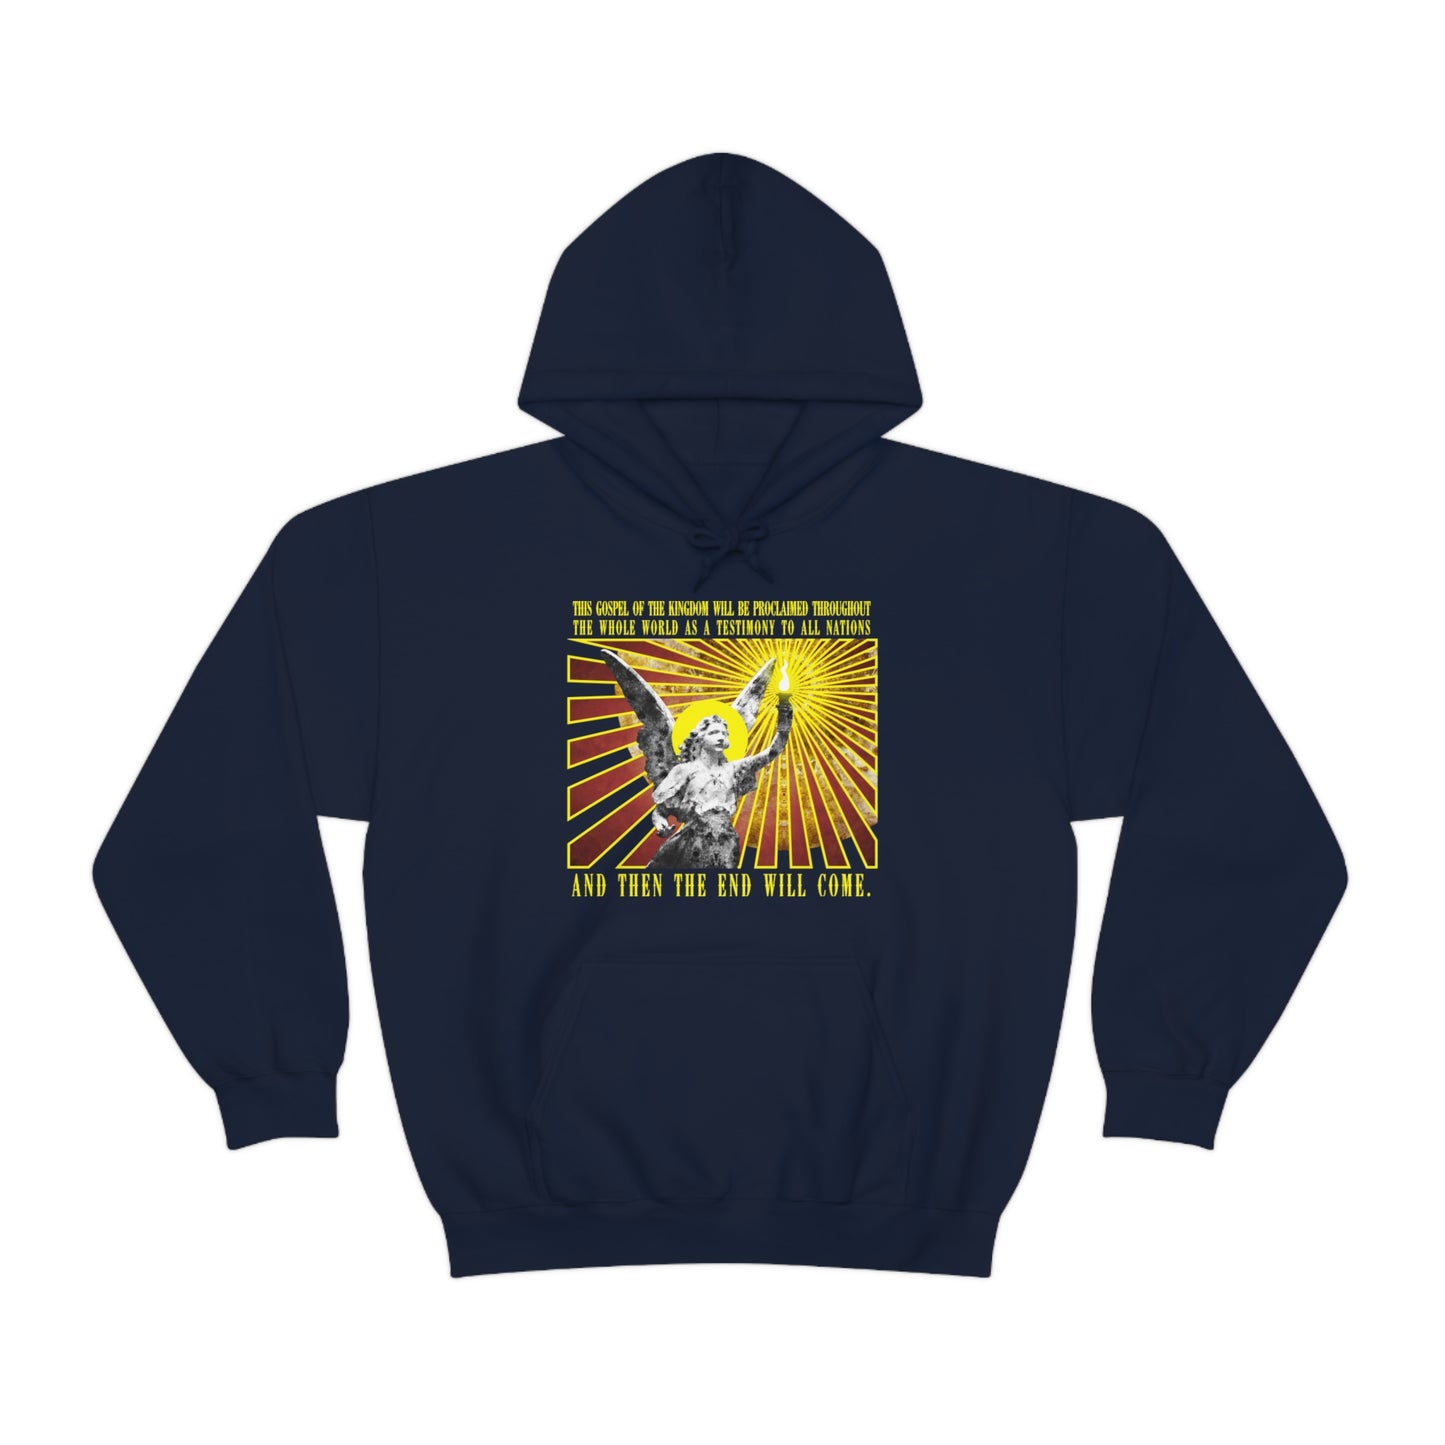 And Then the End Will Come - Angel Design No. 1 | Orthodox Christian Hoodie / Hooded Sweatshirt